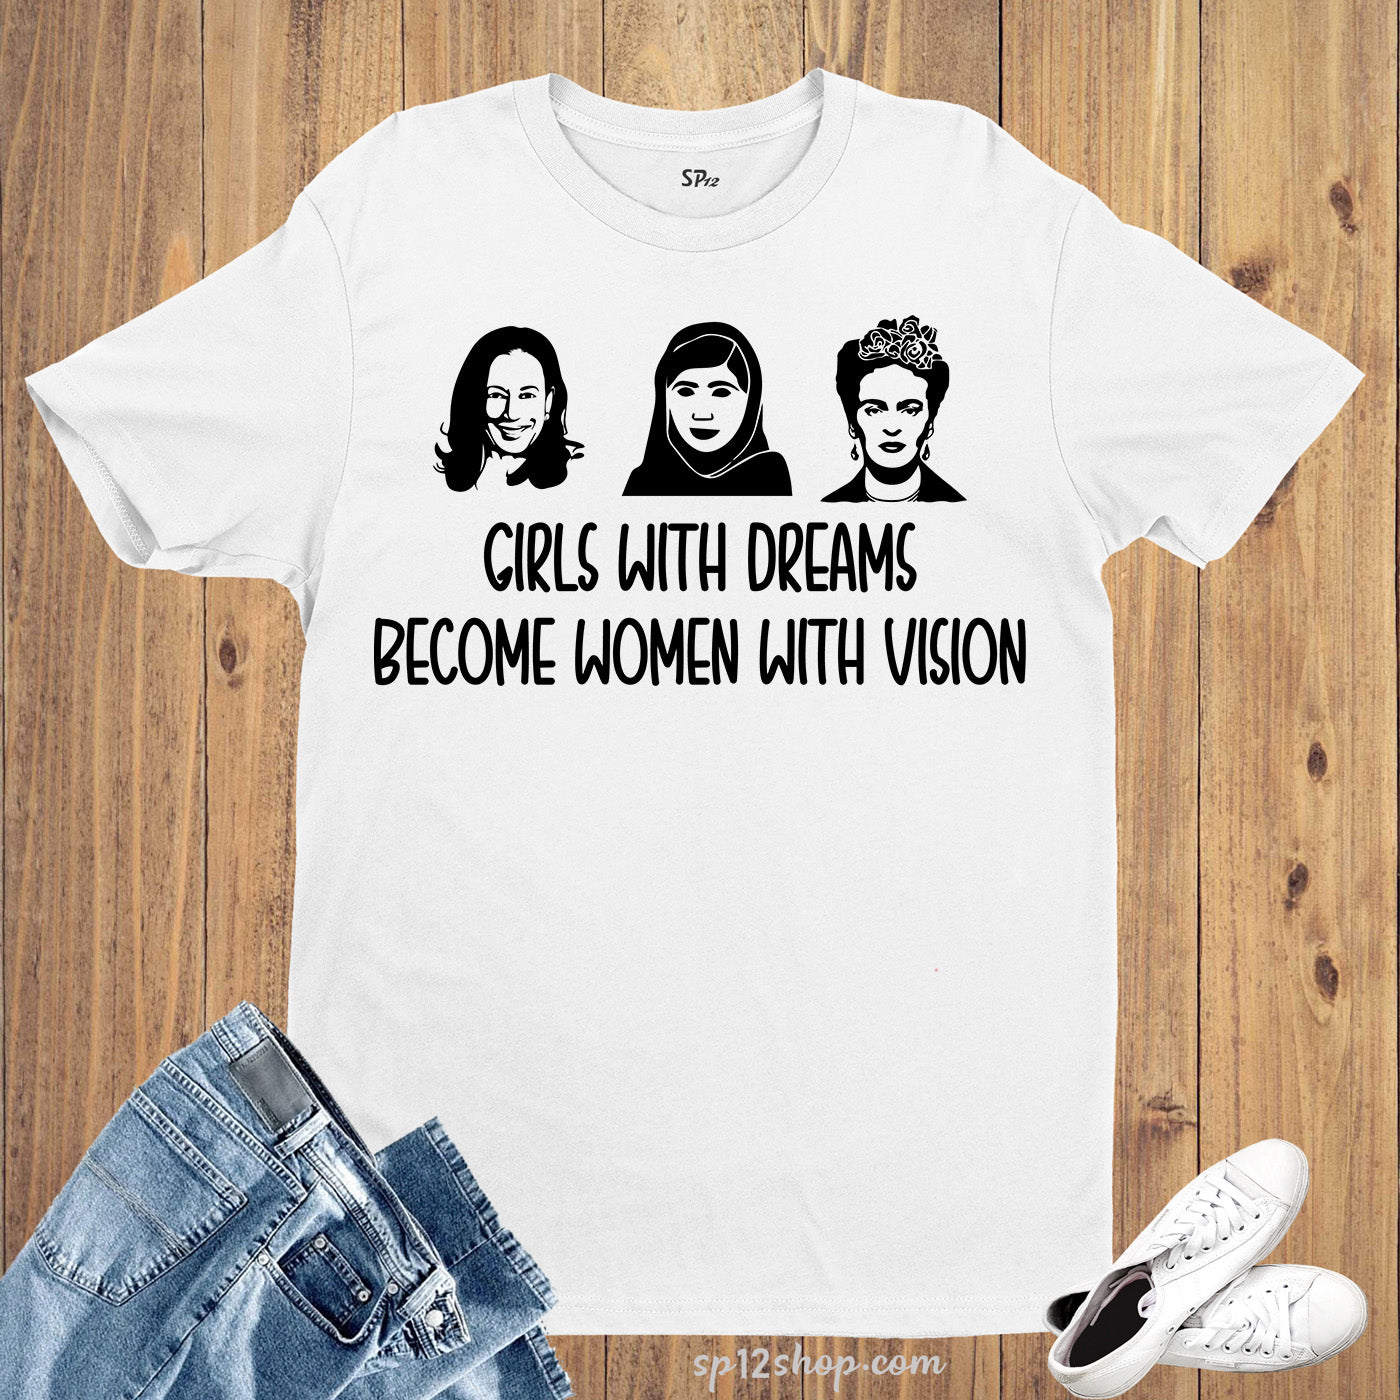 Girls With Dreams Become Women With Vision T Shirt 